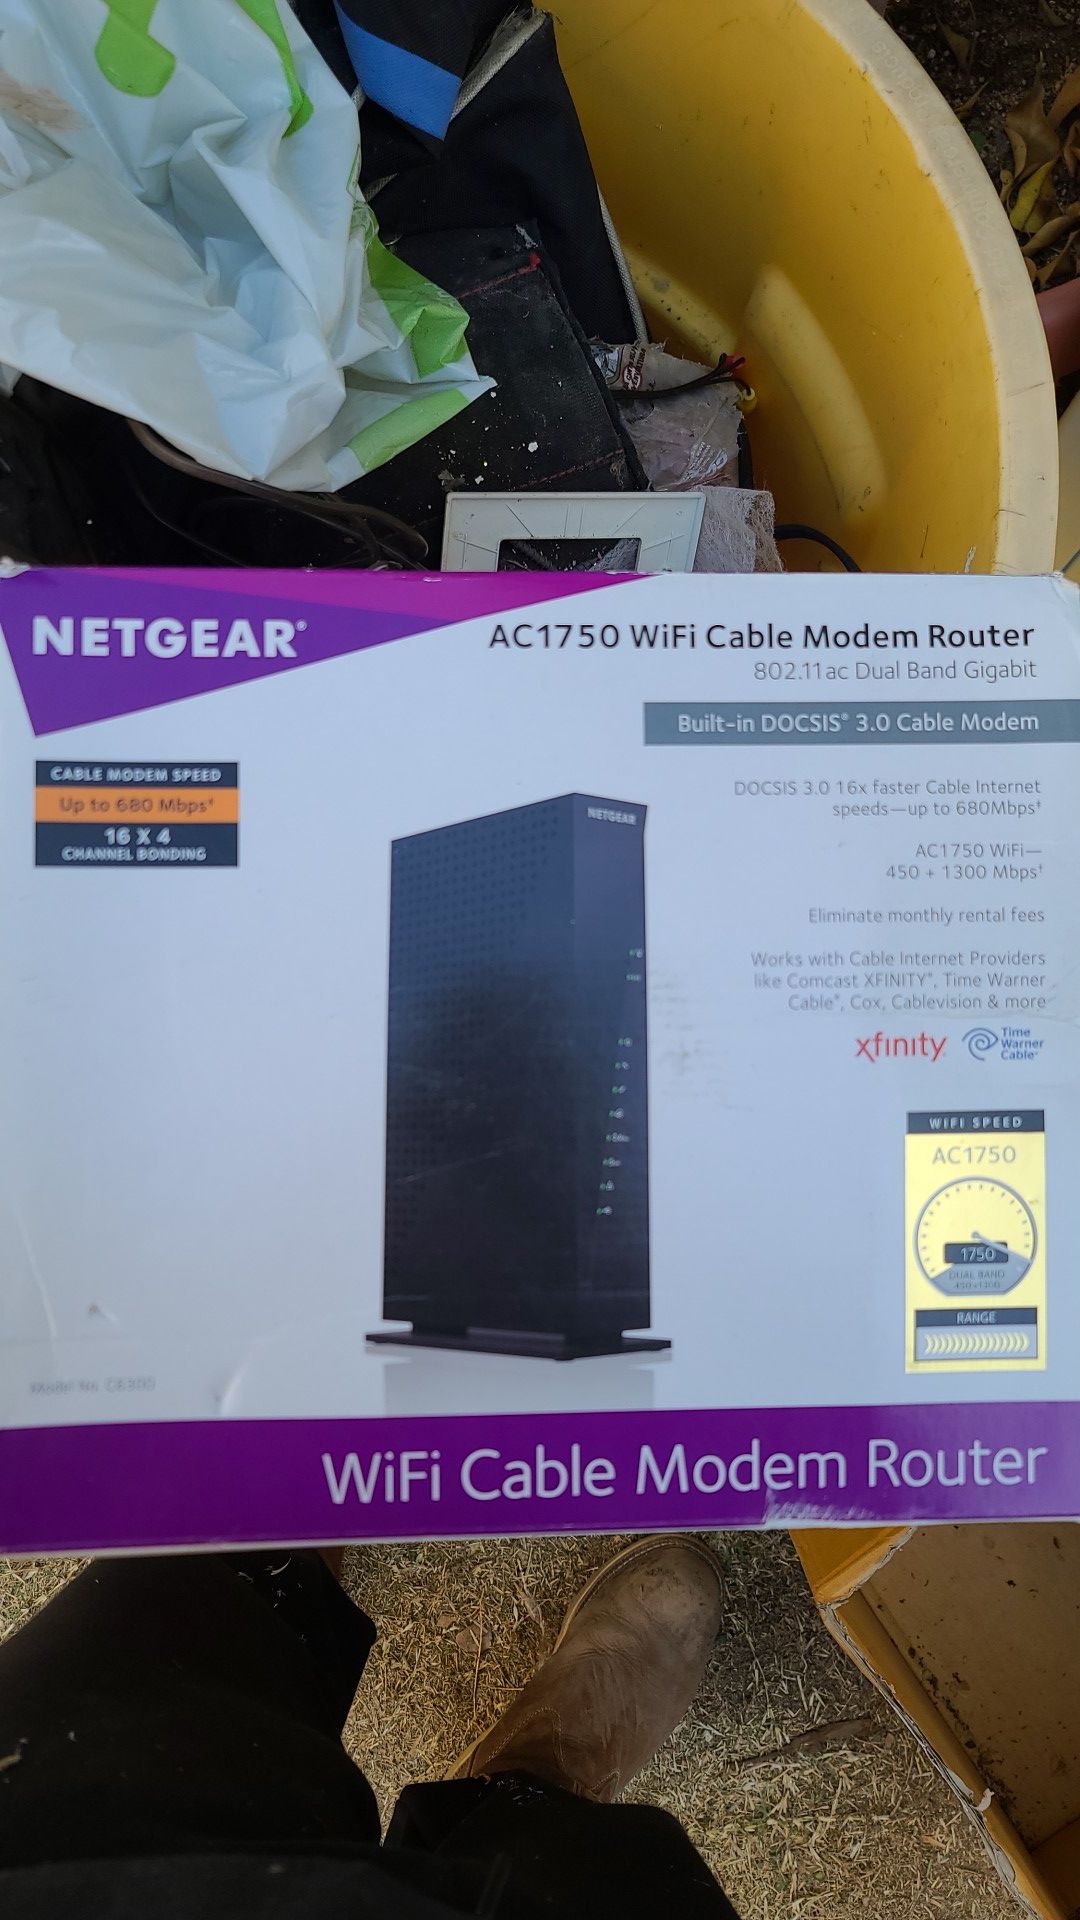 Netgear ac1750 wifi cable modem router 802.11 ac dual band